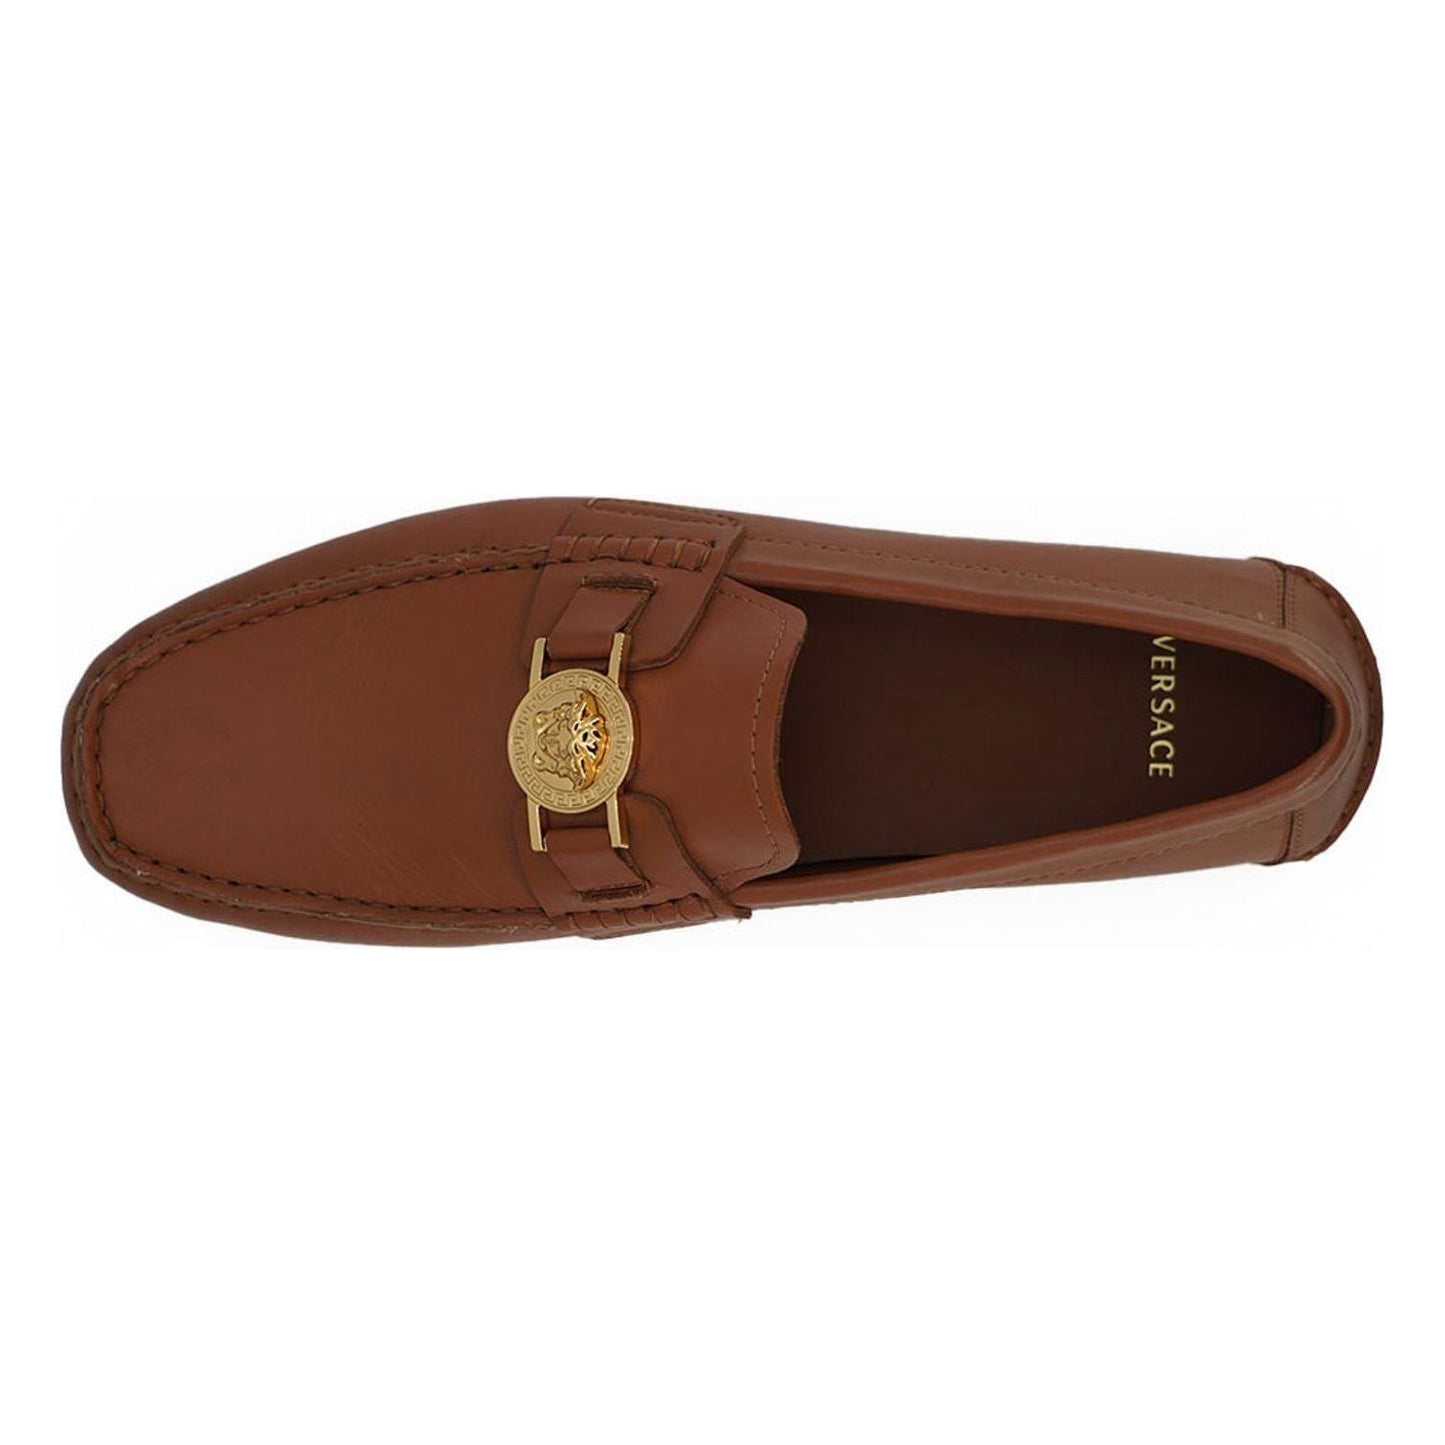 Versace Elegant Medusa-Embossed Leather Loafers natural-brown-calf-leather-loafers-shoes